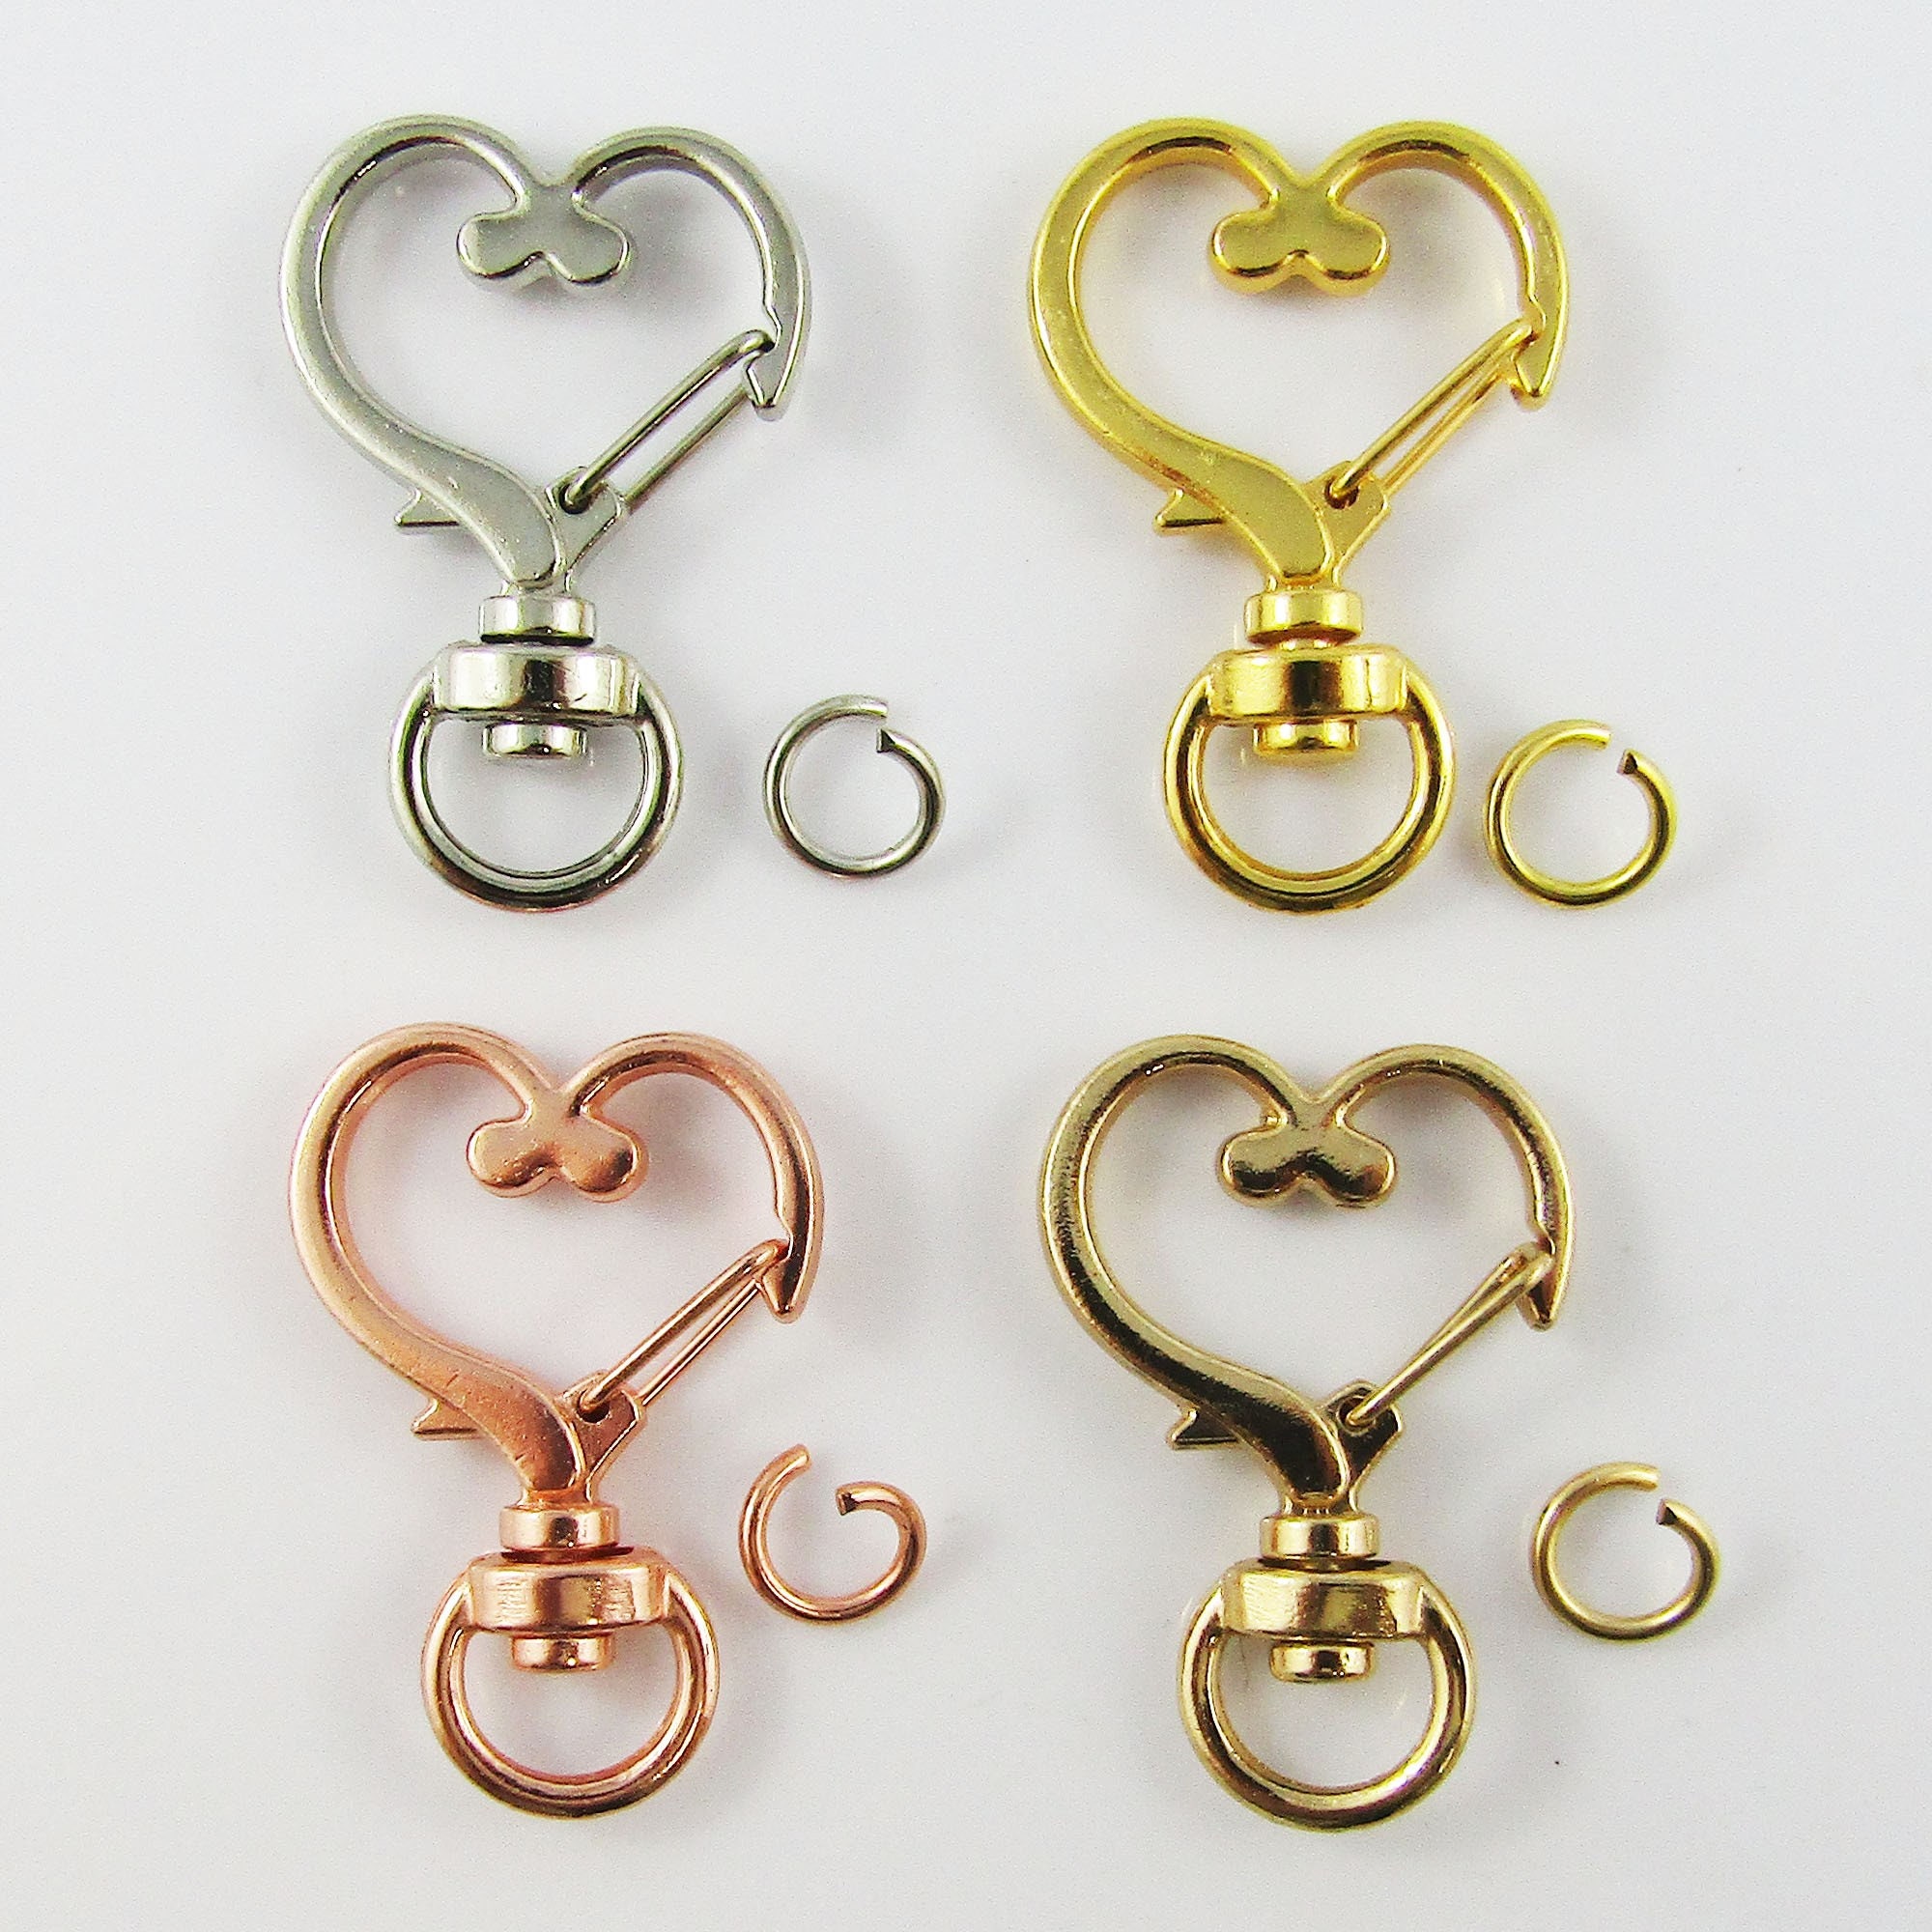 Heart Ring Connector, Solid Heart Jump Ring, Heart Frame Charm 10 SF21 